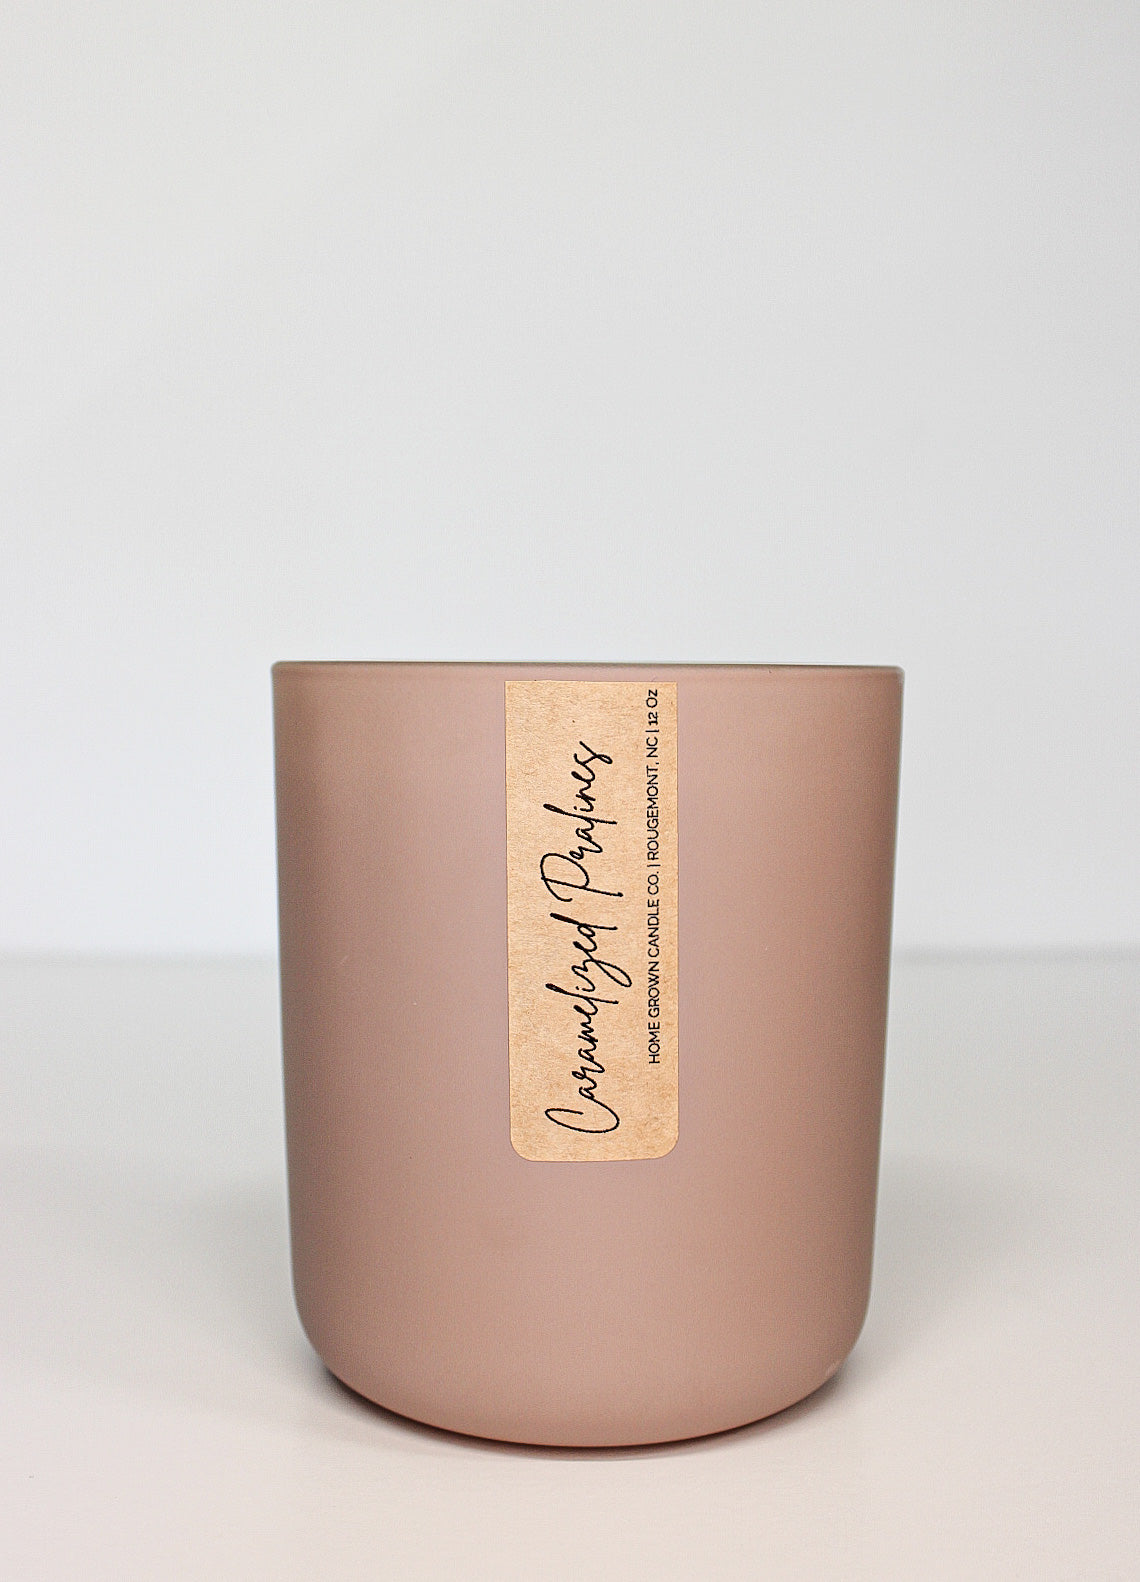 caramelized pralines scented candle